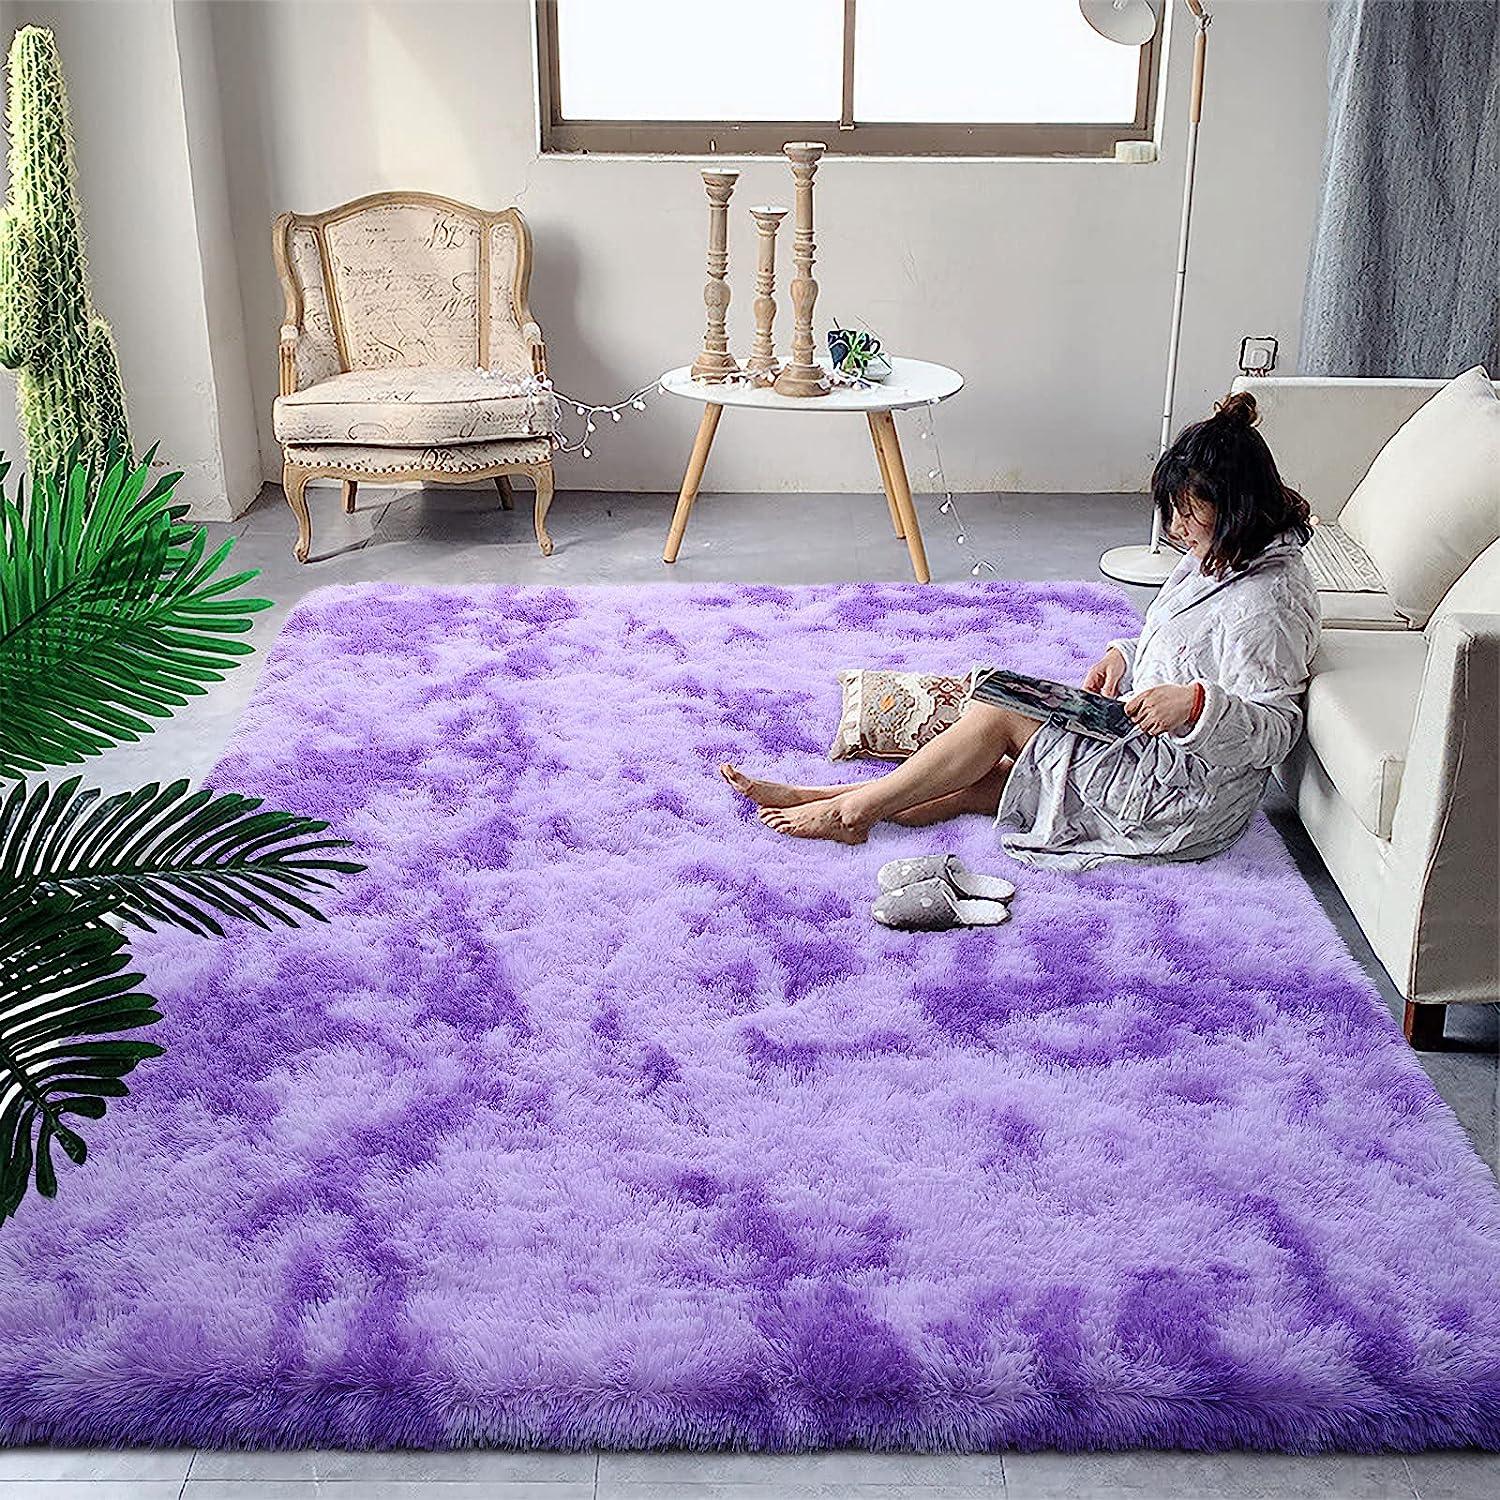 Best Non Toxic Rugs